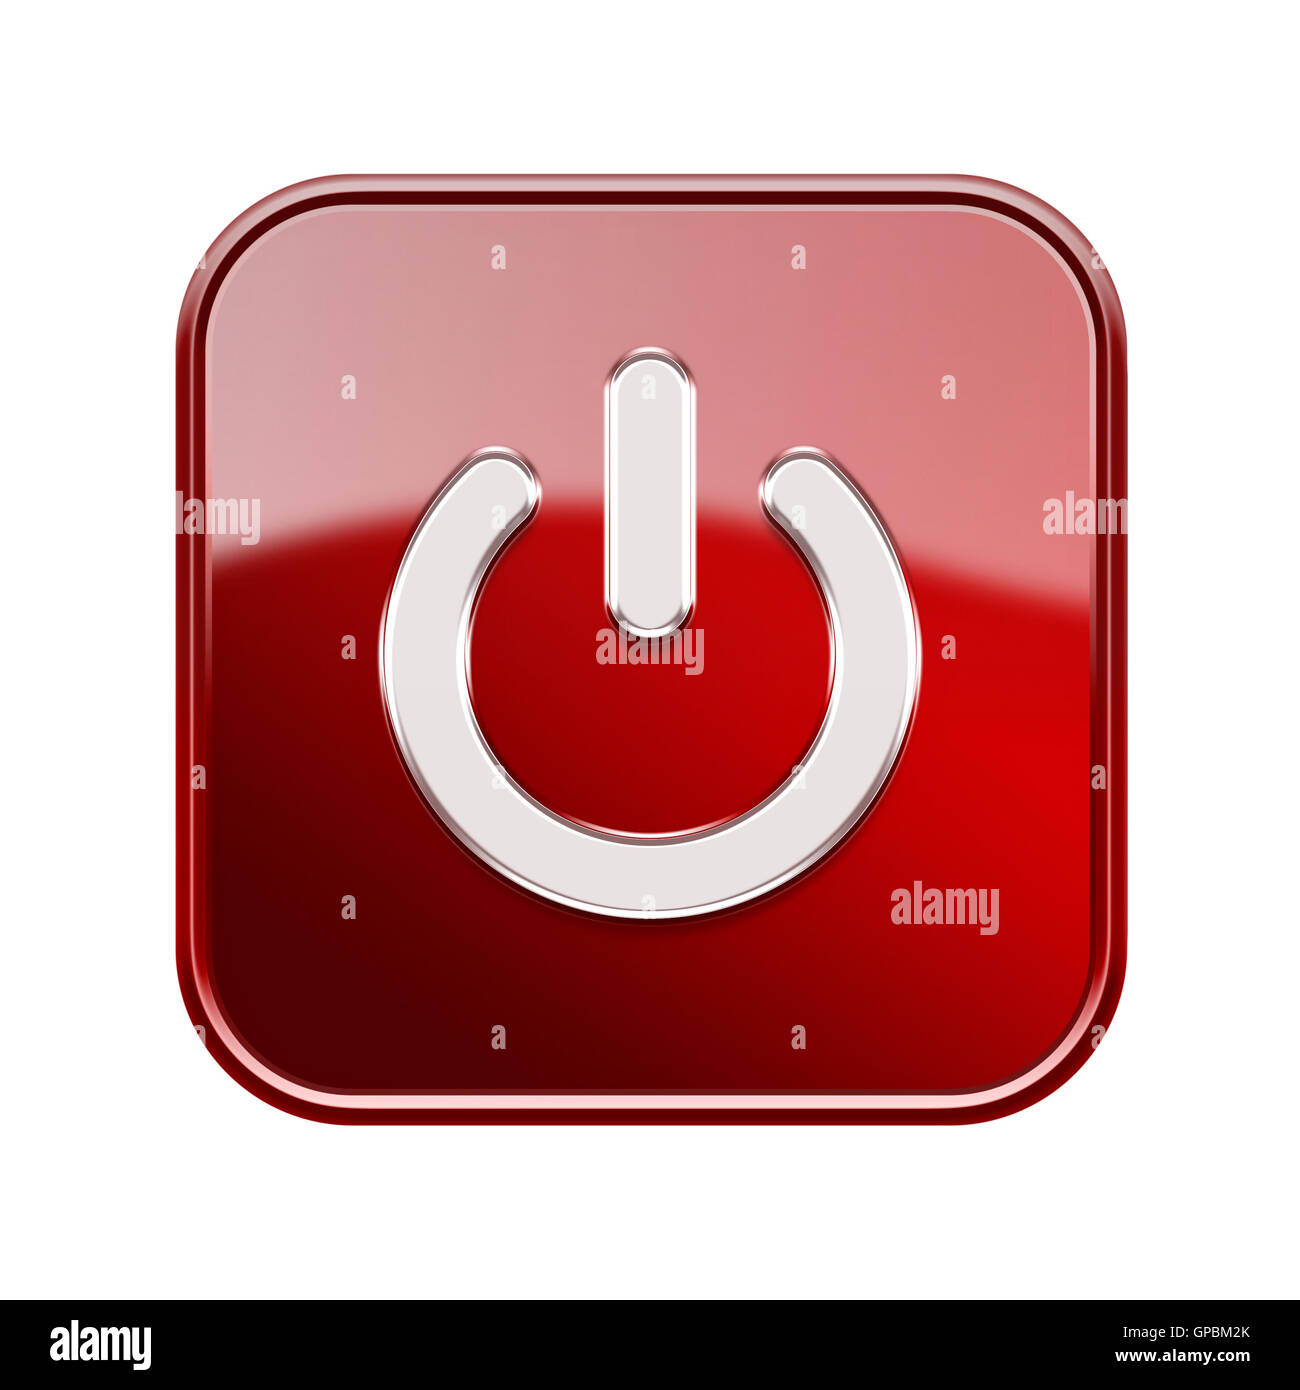 Power button icon glossy red, isolated on white background Stock Photo